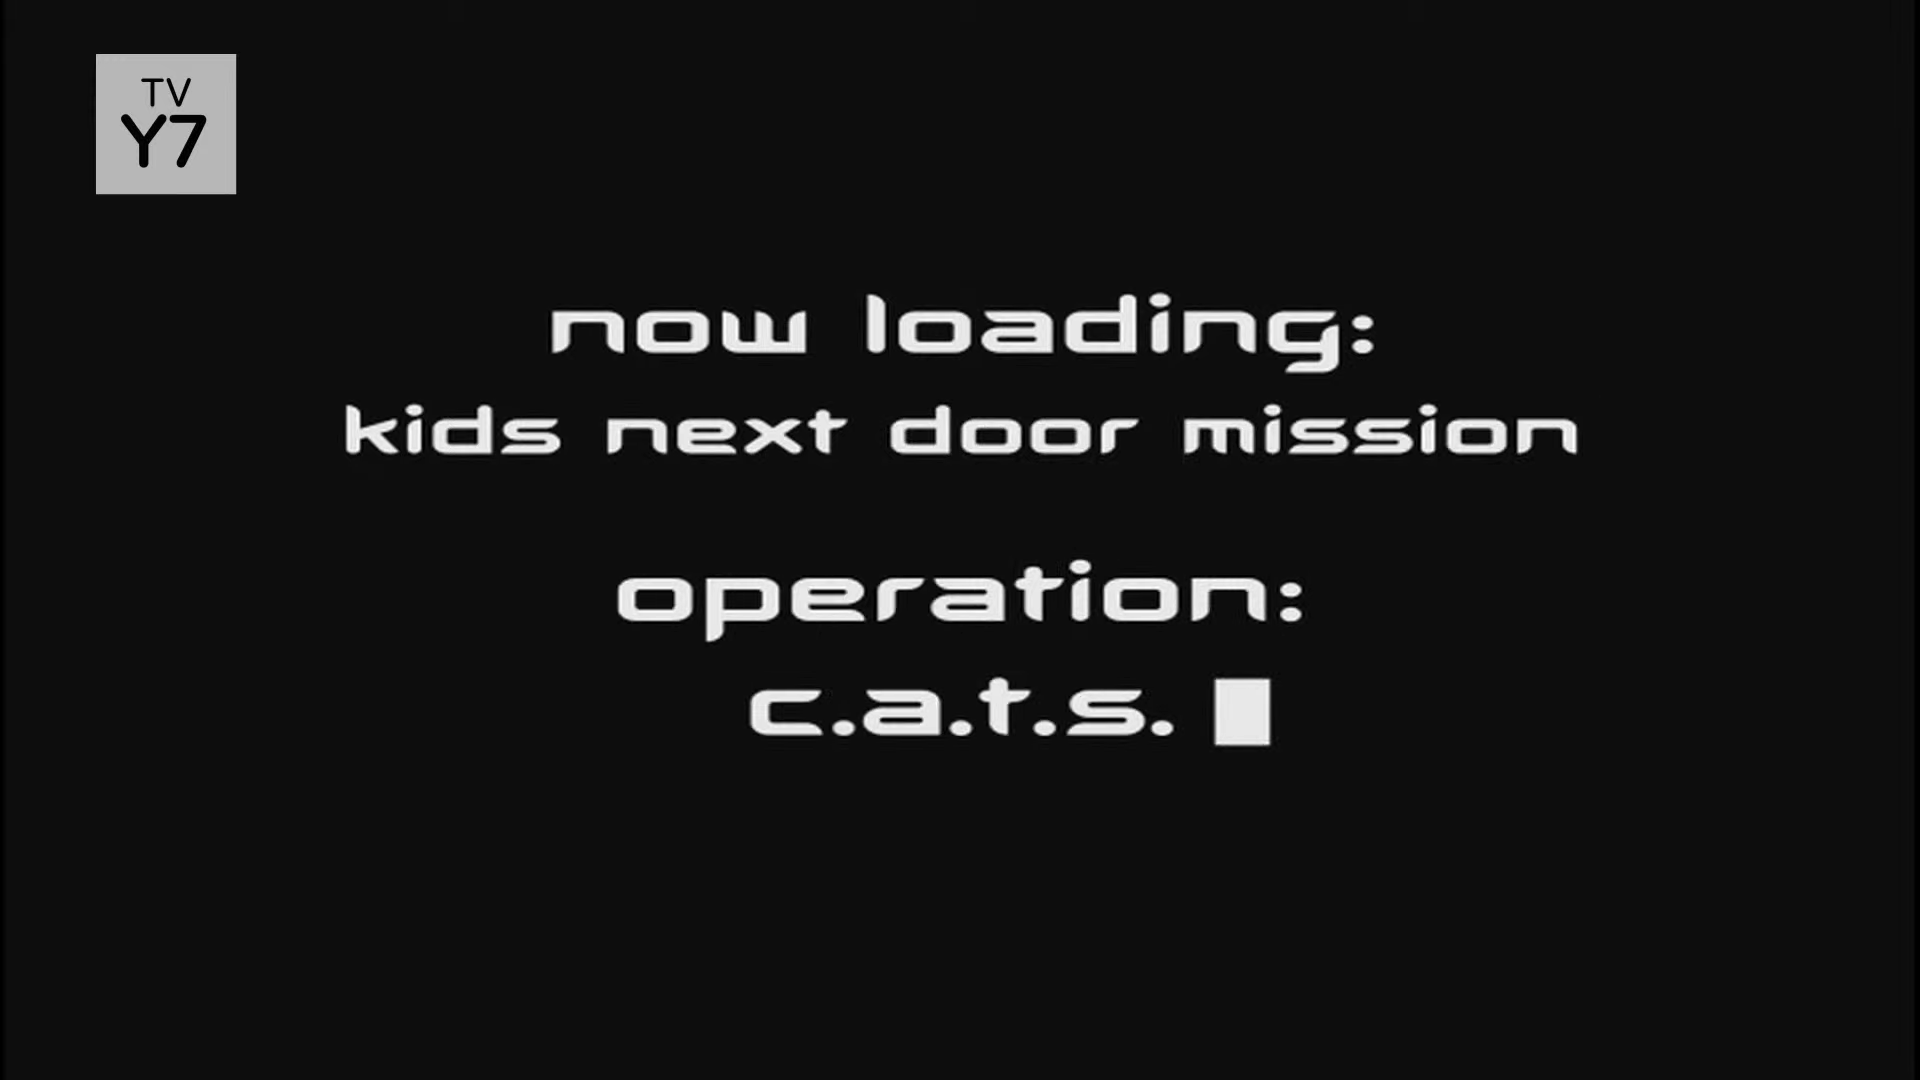 September 12, 2022/Operation: C.A.T.S. / Operation: P.O.P. 